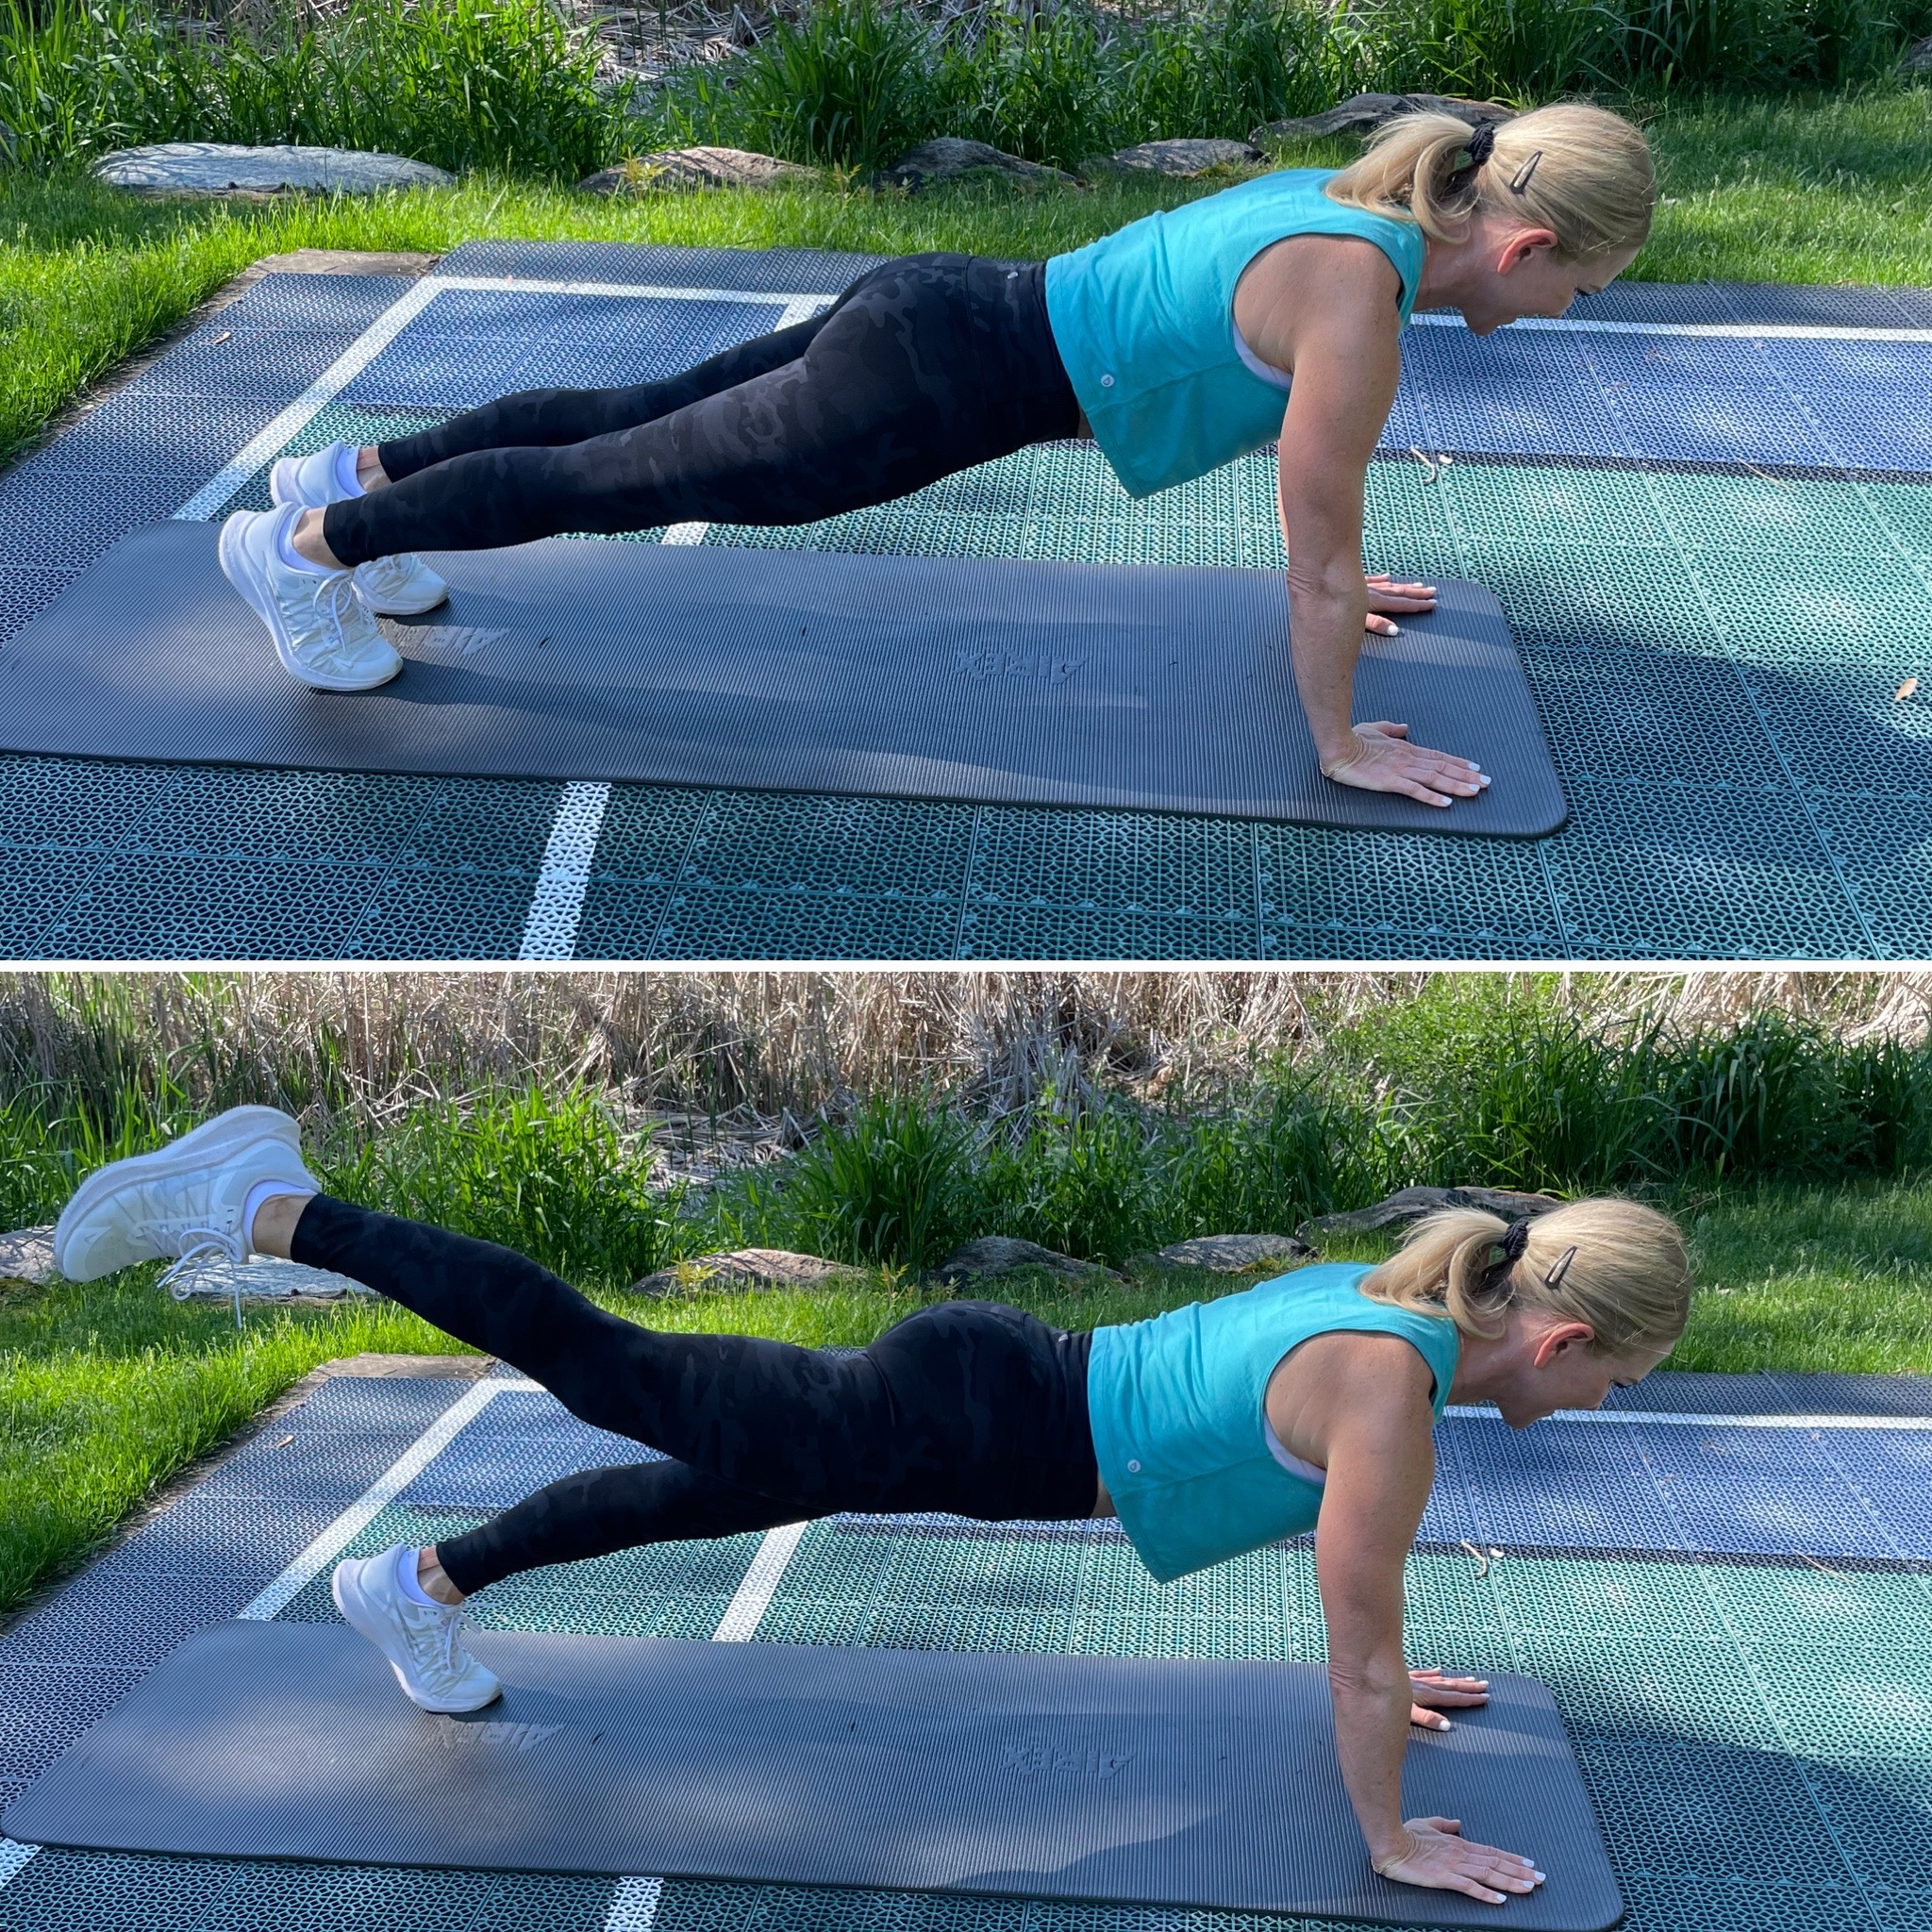 Chris Freytag wearing a blue tank top and black leggings demonstrating a plank with alternating hip extension